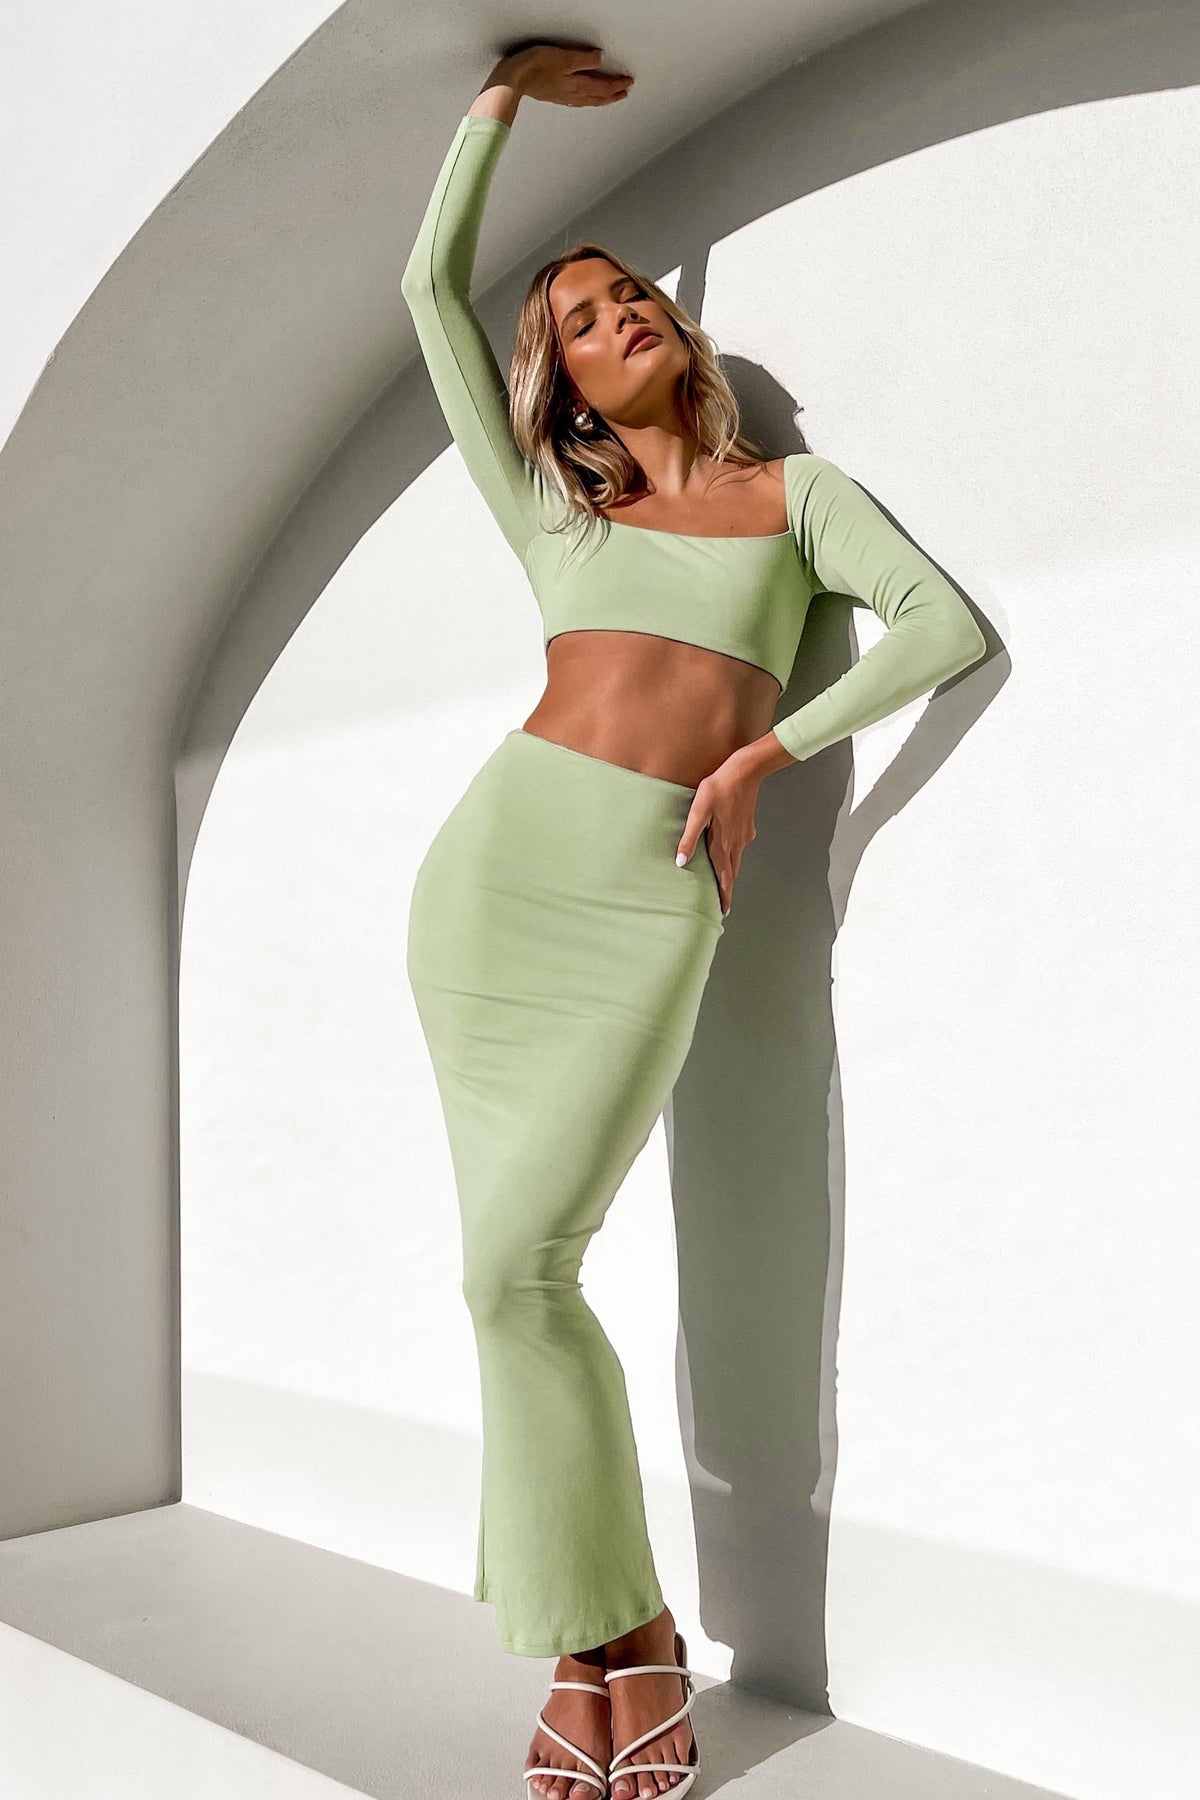 Eloria Top, COTTON &amp; POLYESTER, COTTON AND POLYESTER, CROP TOPS, GREEN, LONG SLEEVE, new arrivals, POLYESTER &amp; COTTON, POLYESTER AND COTTON, TOP, TOPS, , -MISHKAH